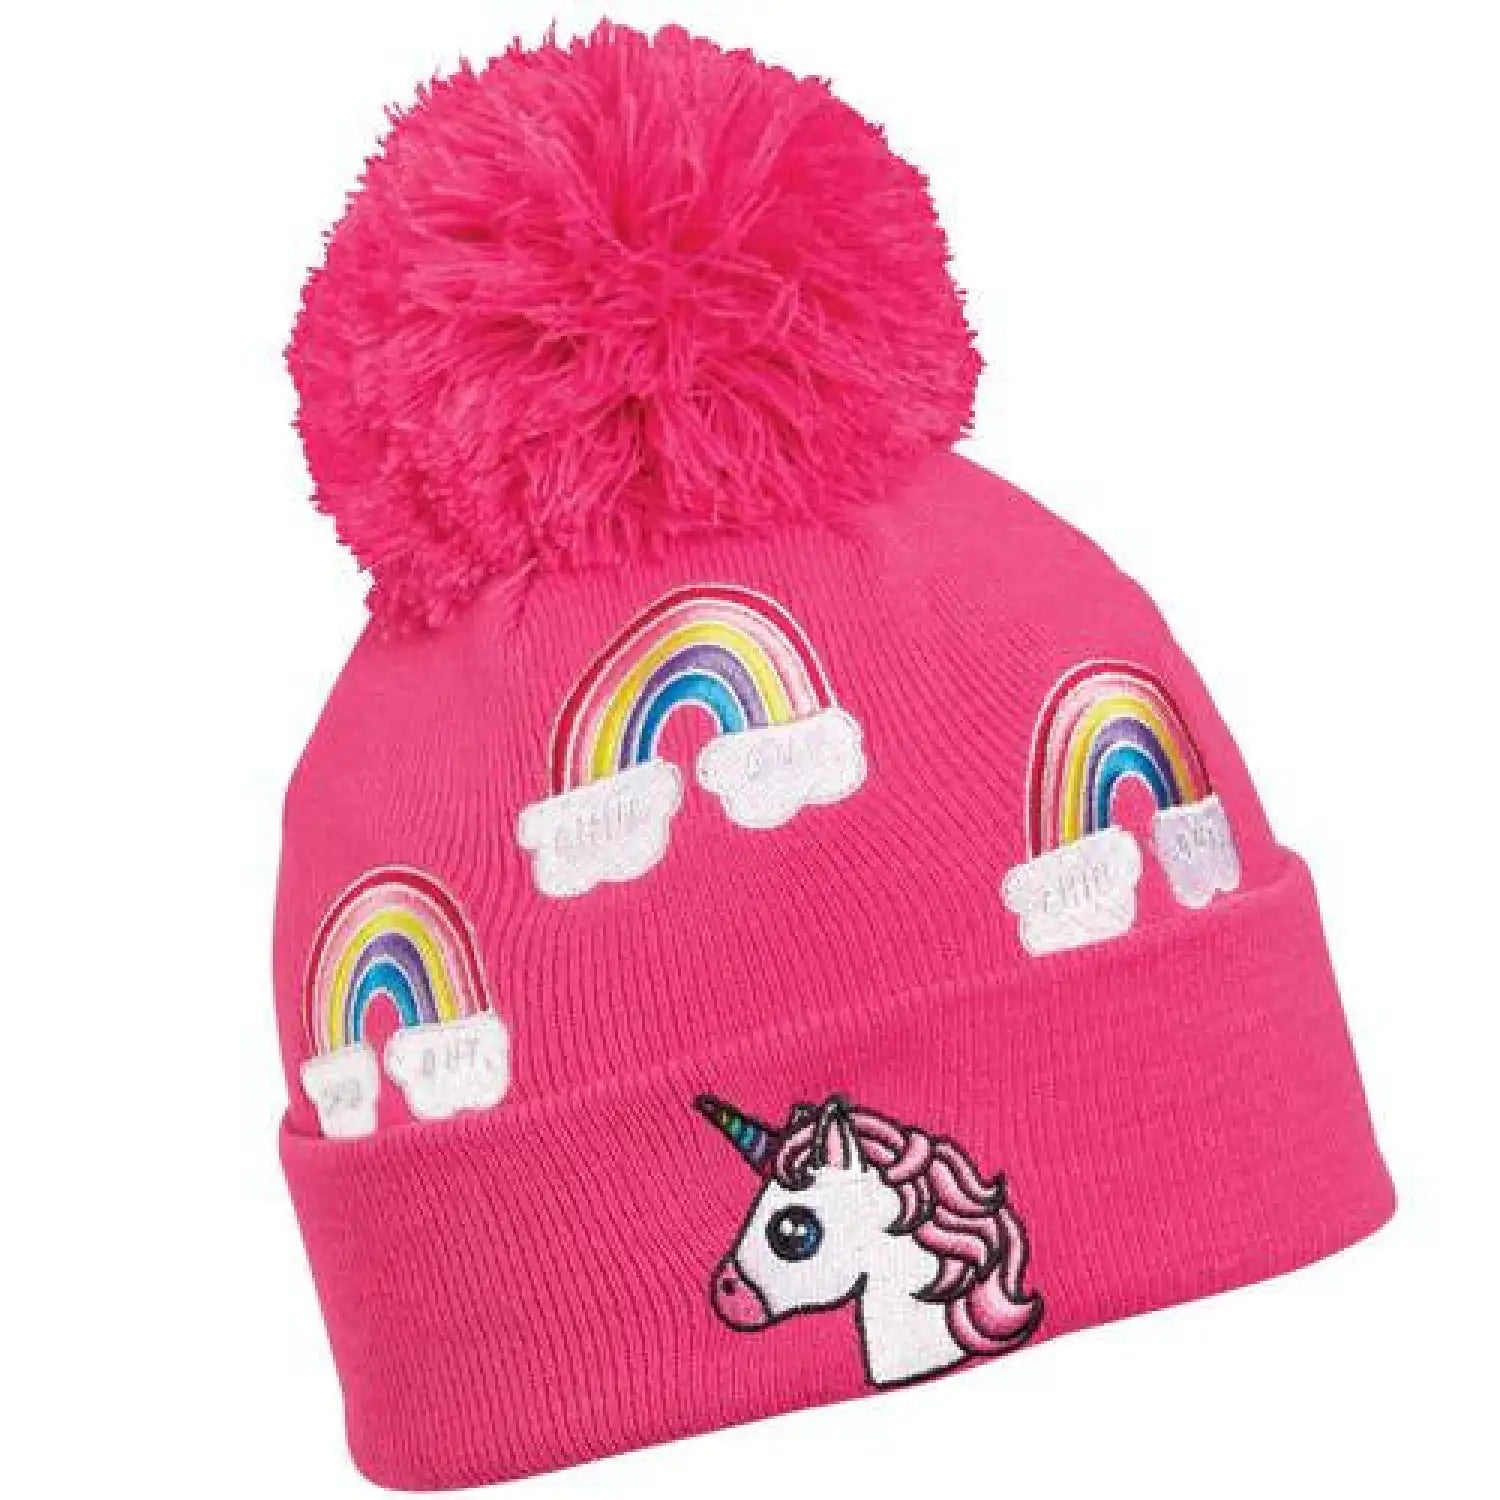 Turtle Fur's Unicorn Pom Hat in Bright Pink with Bright Pink Pom on top.  Three rainbows with clouds on the cap with the unicorn on the fold.